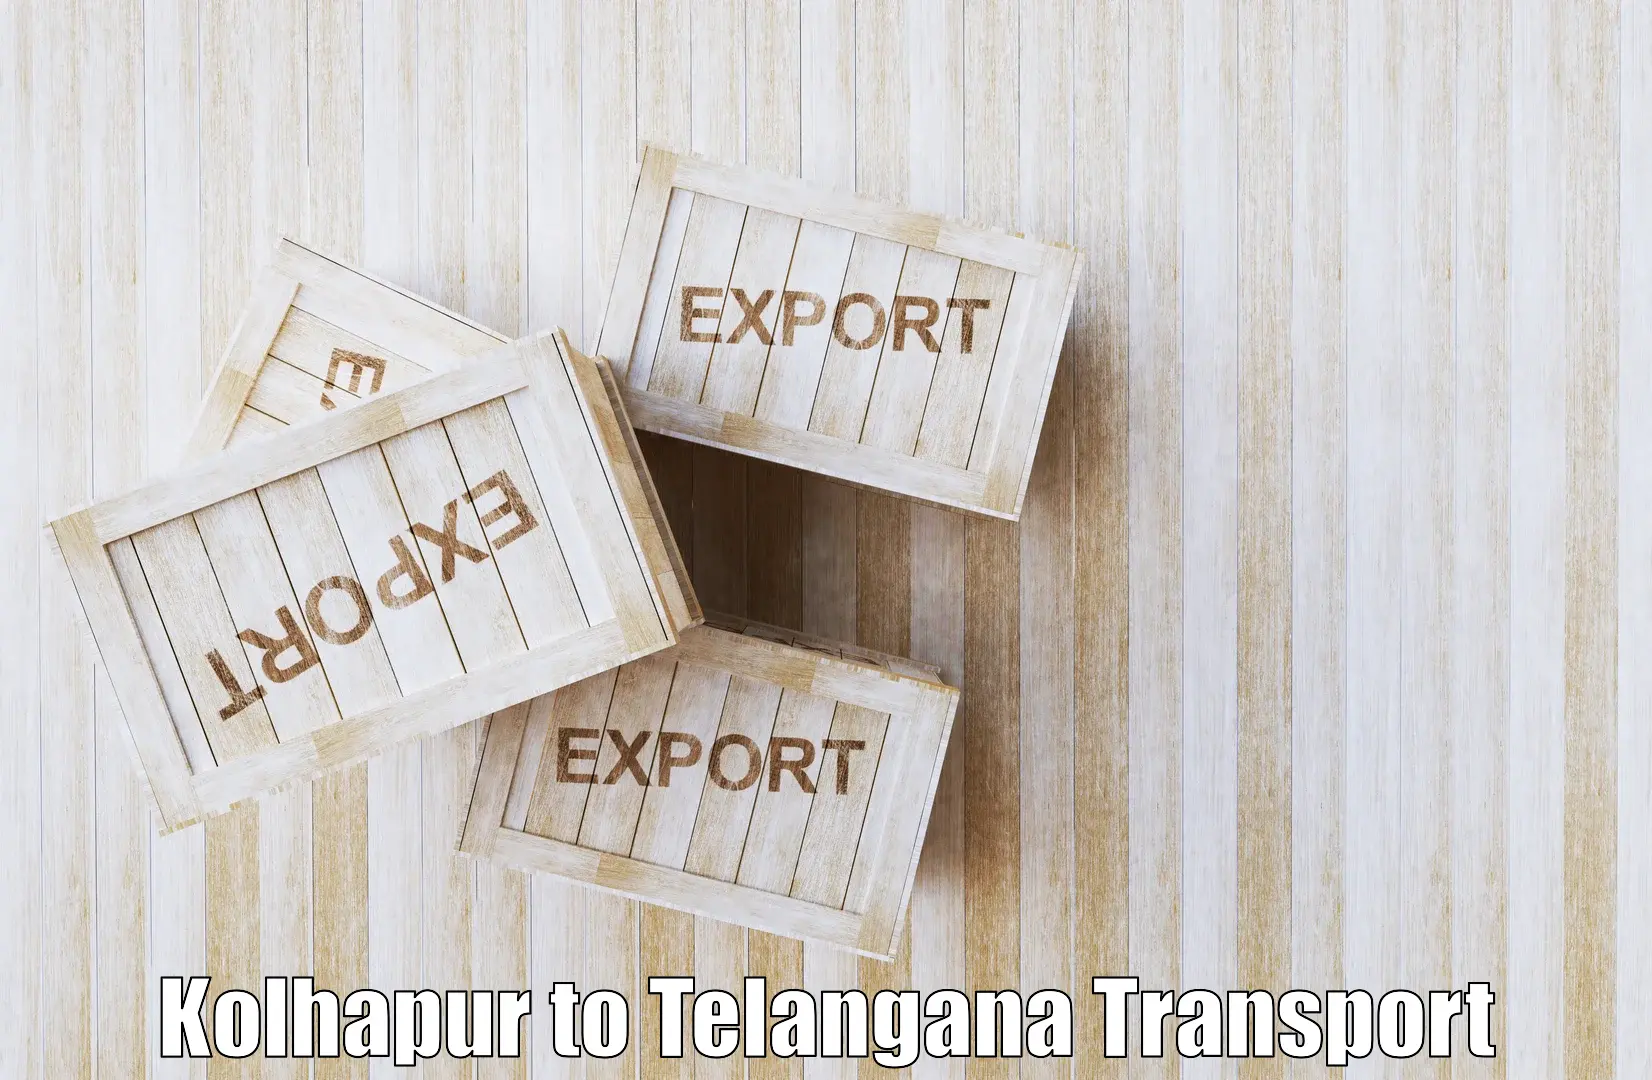 Air cargo transport services Kolhapur to Hyderabad